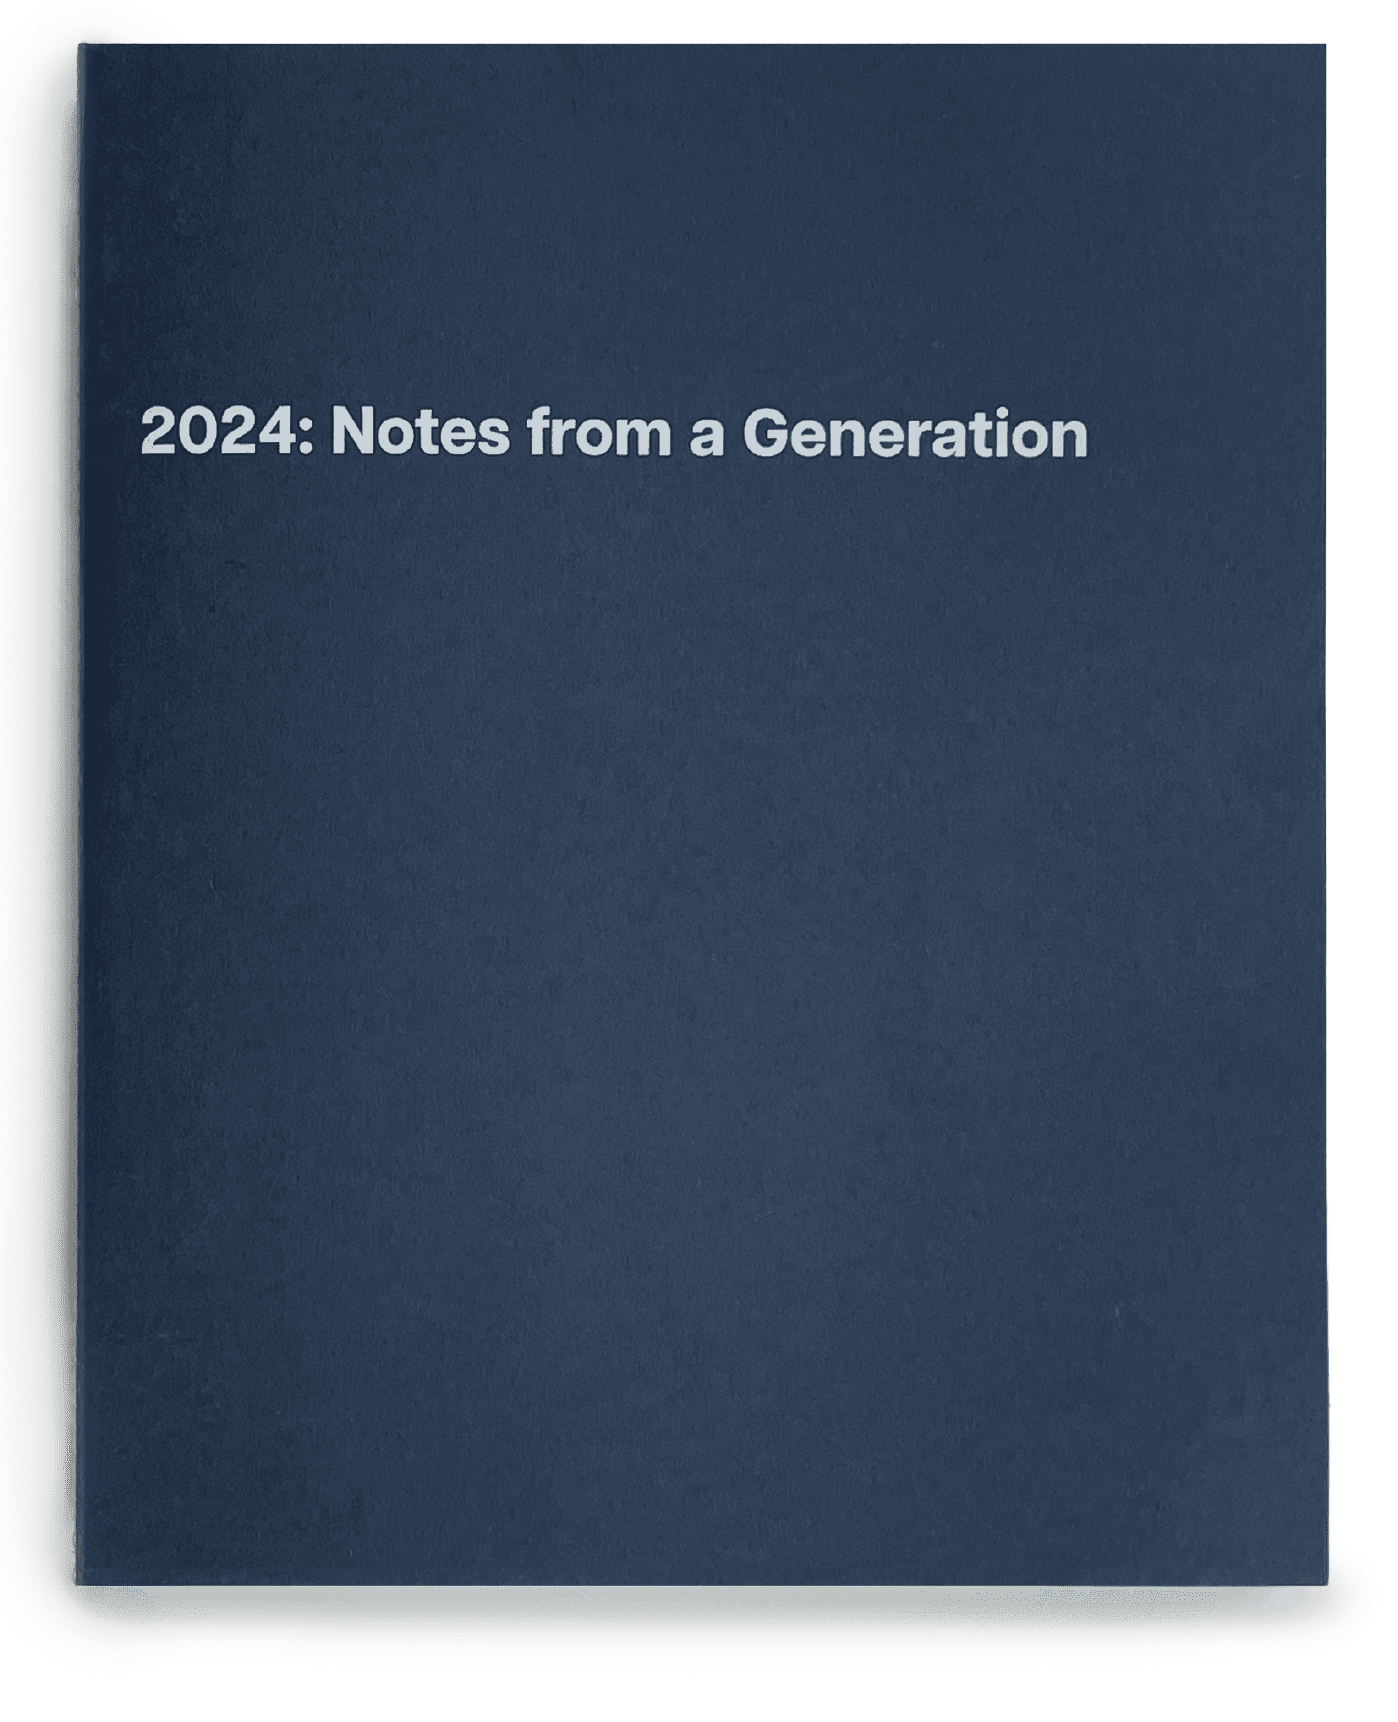 2024: Notes from a Generation